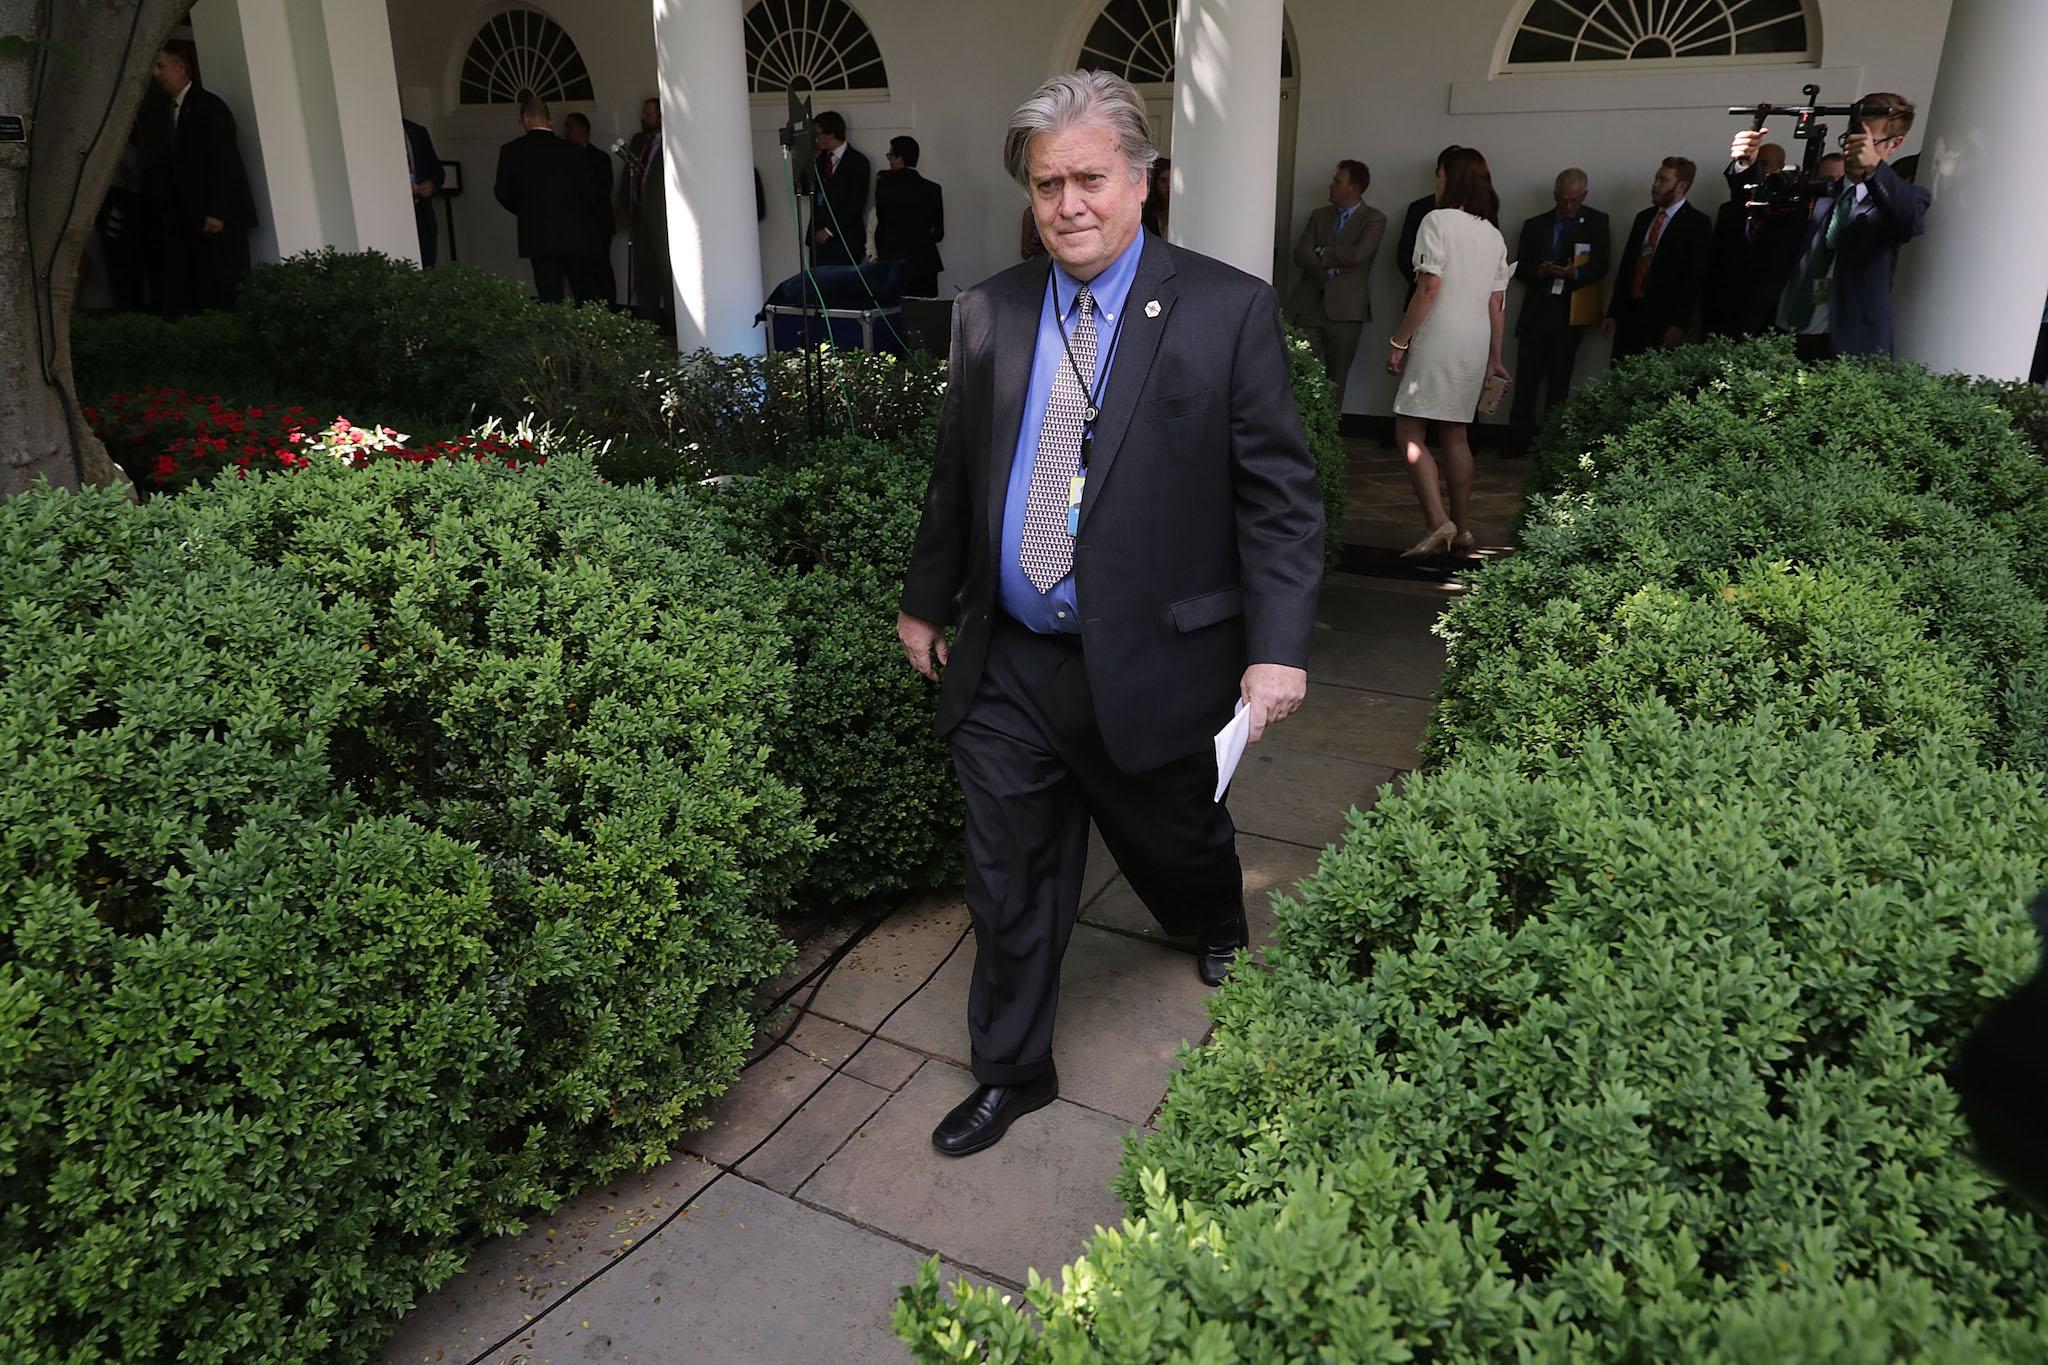 White House Chief Strategist Steve Bannon walks into the Rose Garden before President Donald Trump announces his decision to pull out of the Paris climate agreement